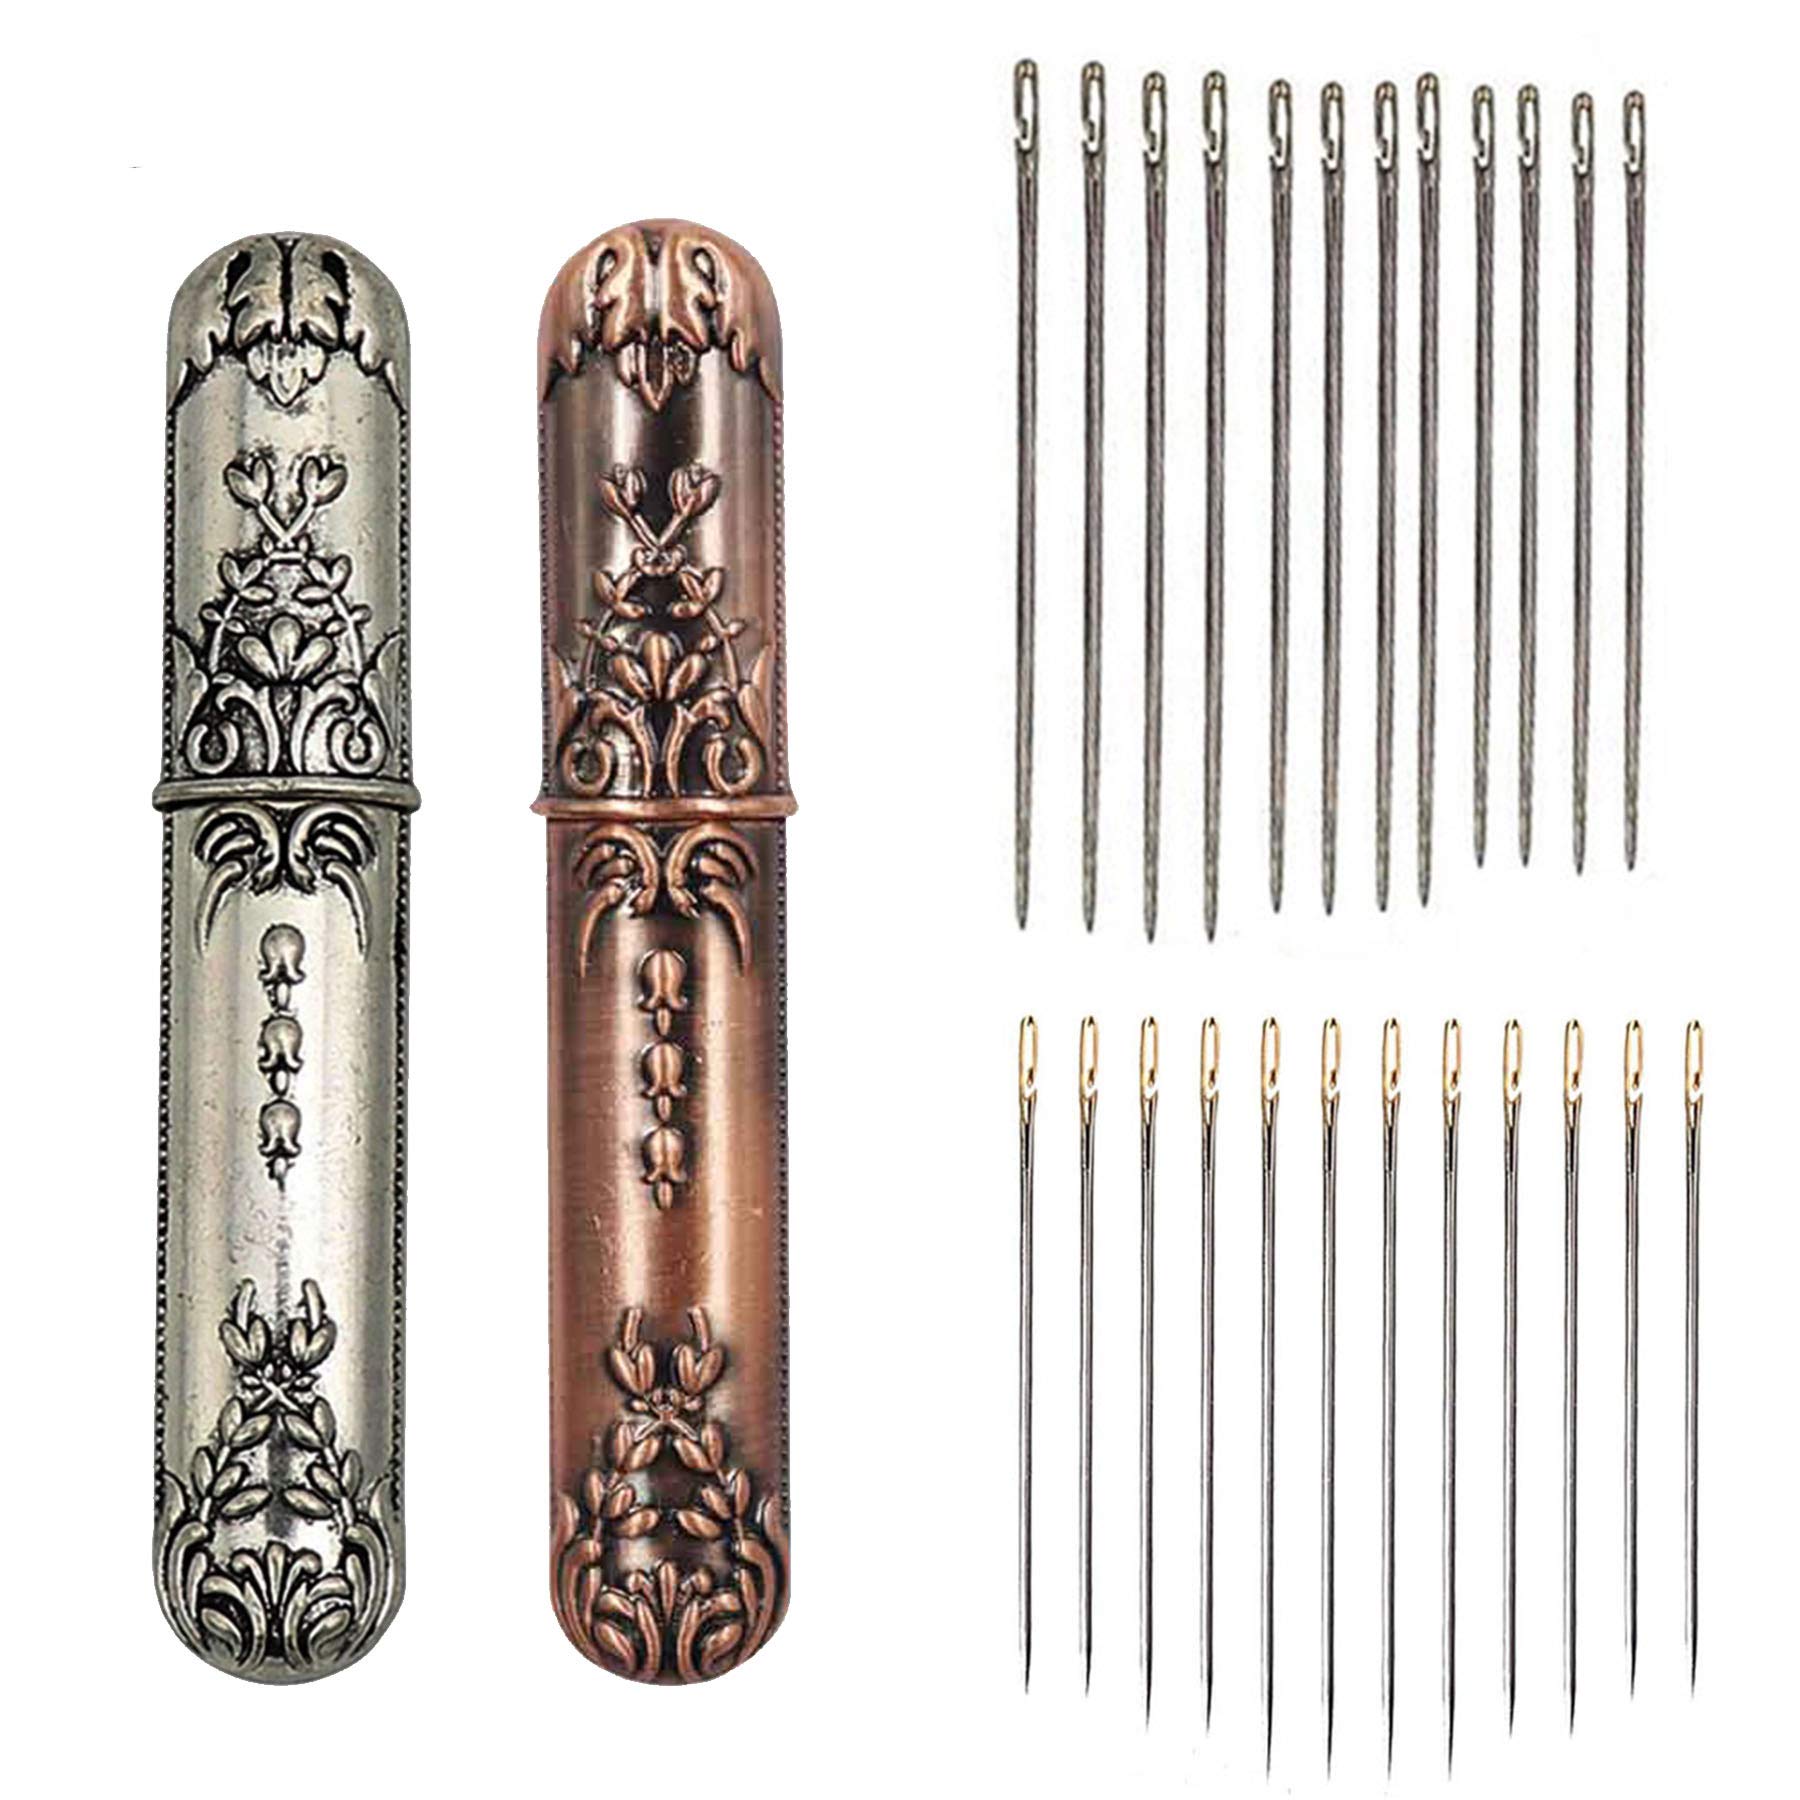 24Pcs Self Threading Needles, Easy Threading Needles for Sewing, Hand  Sewing Needles with Wooden Needle Case (Gold)